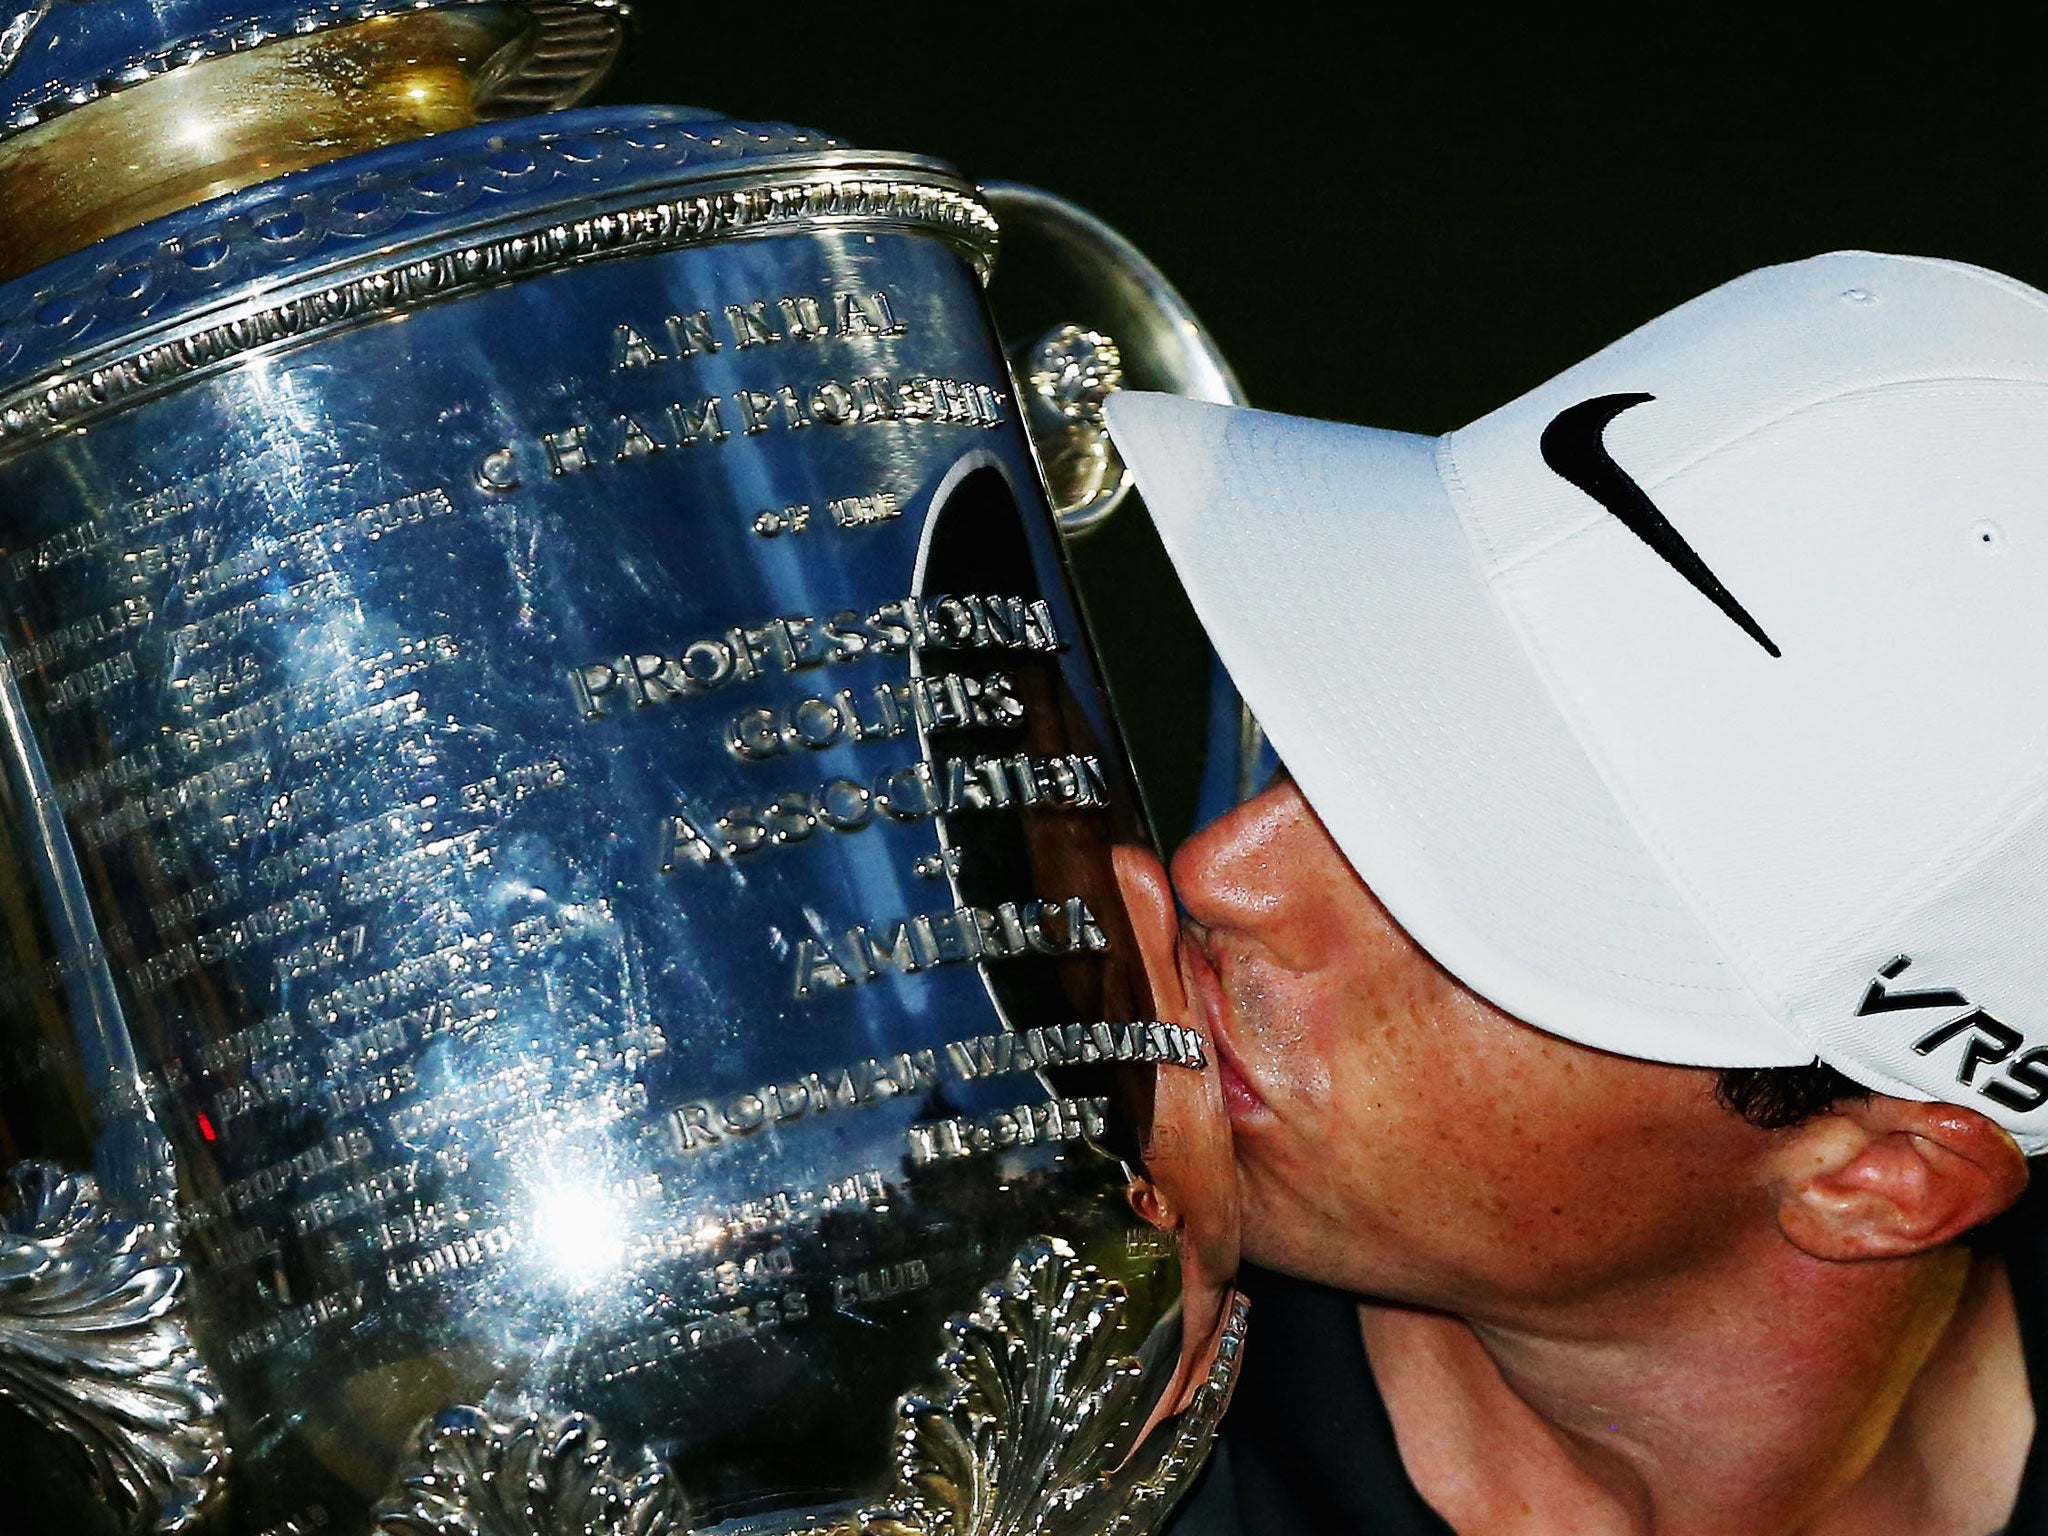 McIlroy makes it two major wins in the space of three weeks